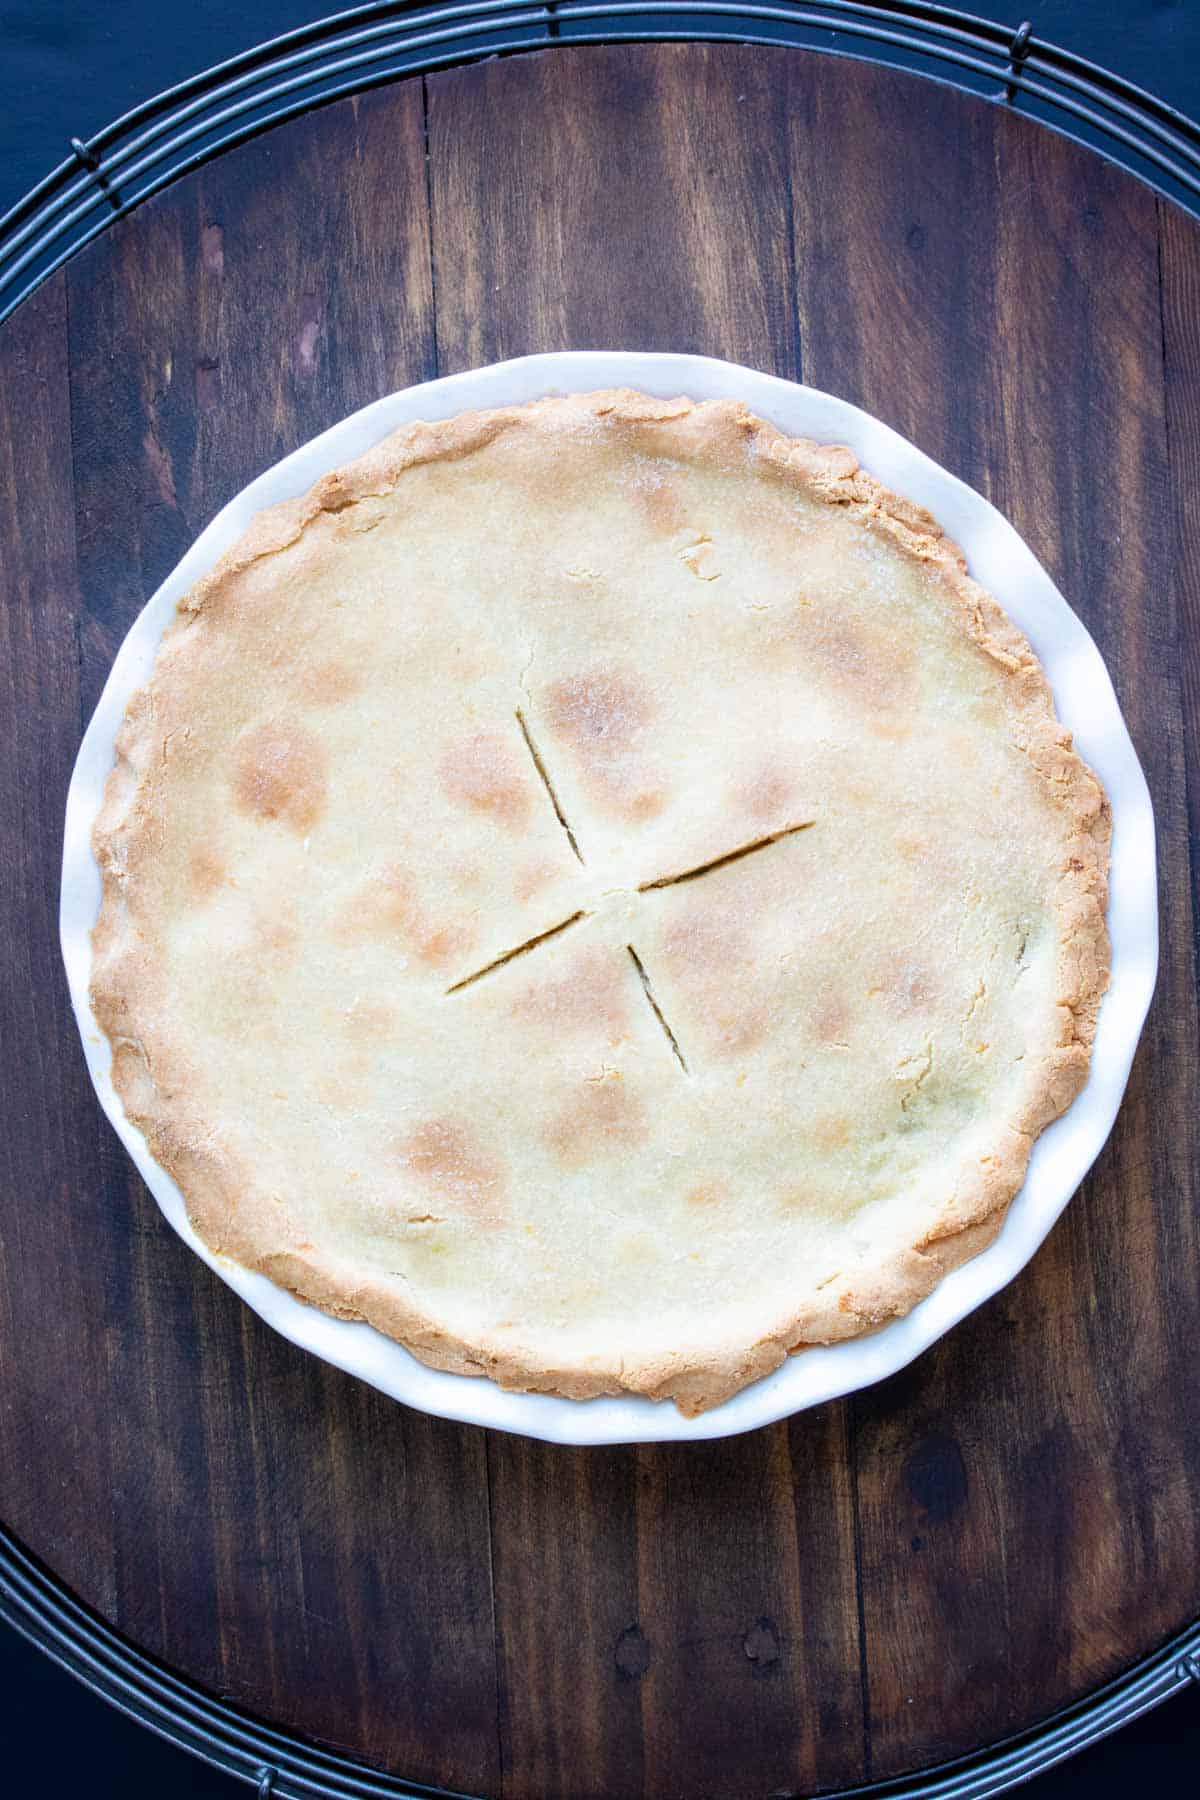 Top view of a baked vegetable pot pie on a wooden surface.